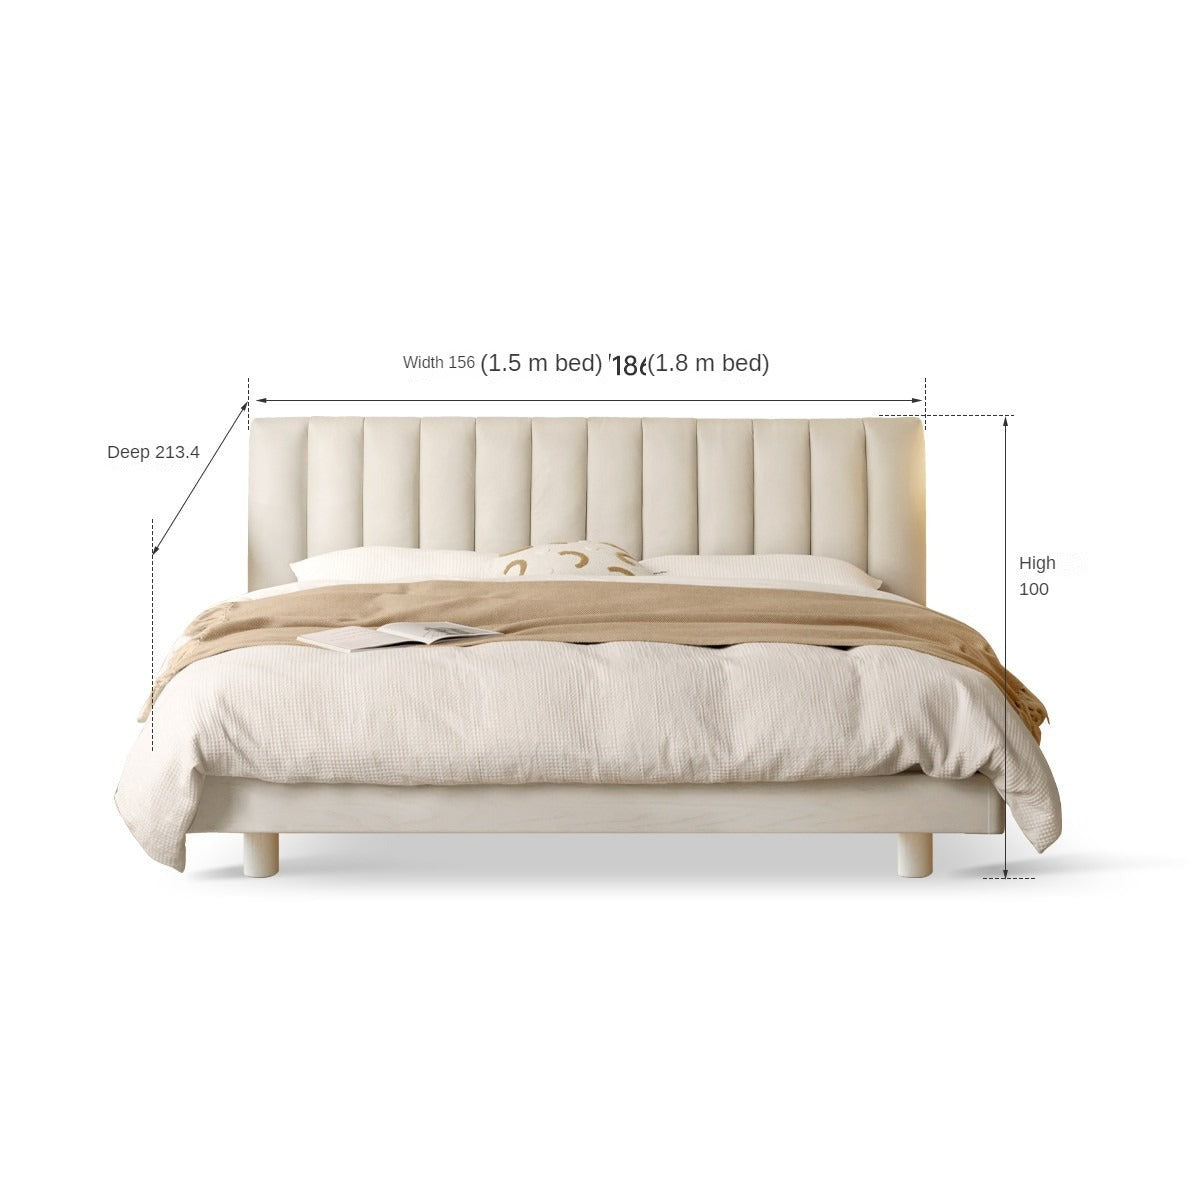 Oak Solid Wood Cream Suspended Technology Fabric Soft Wrapped Bed "